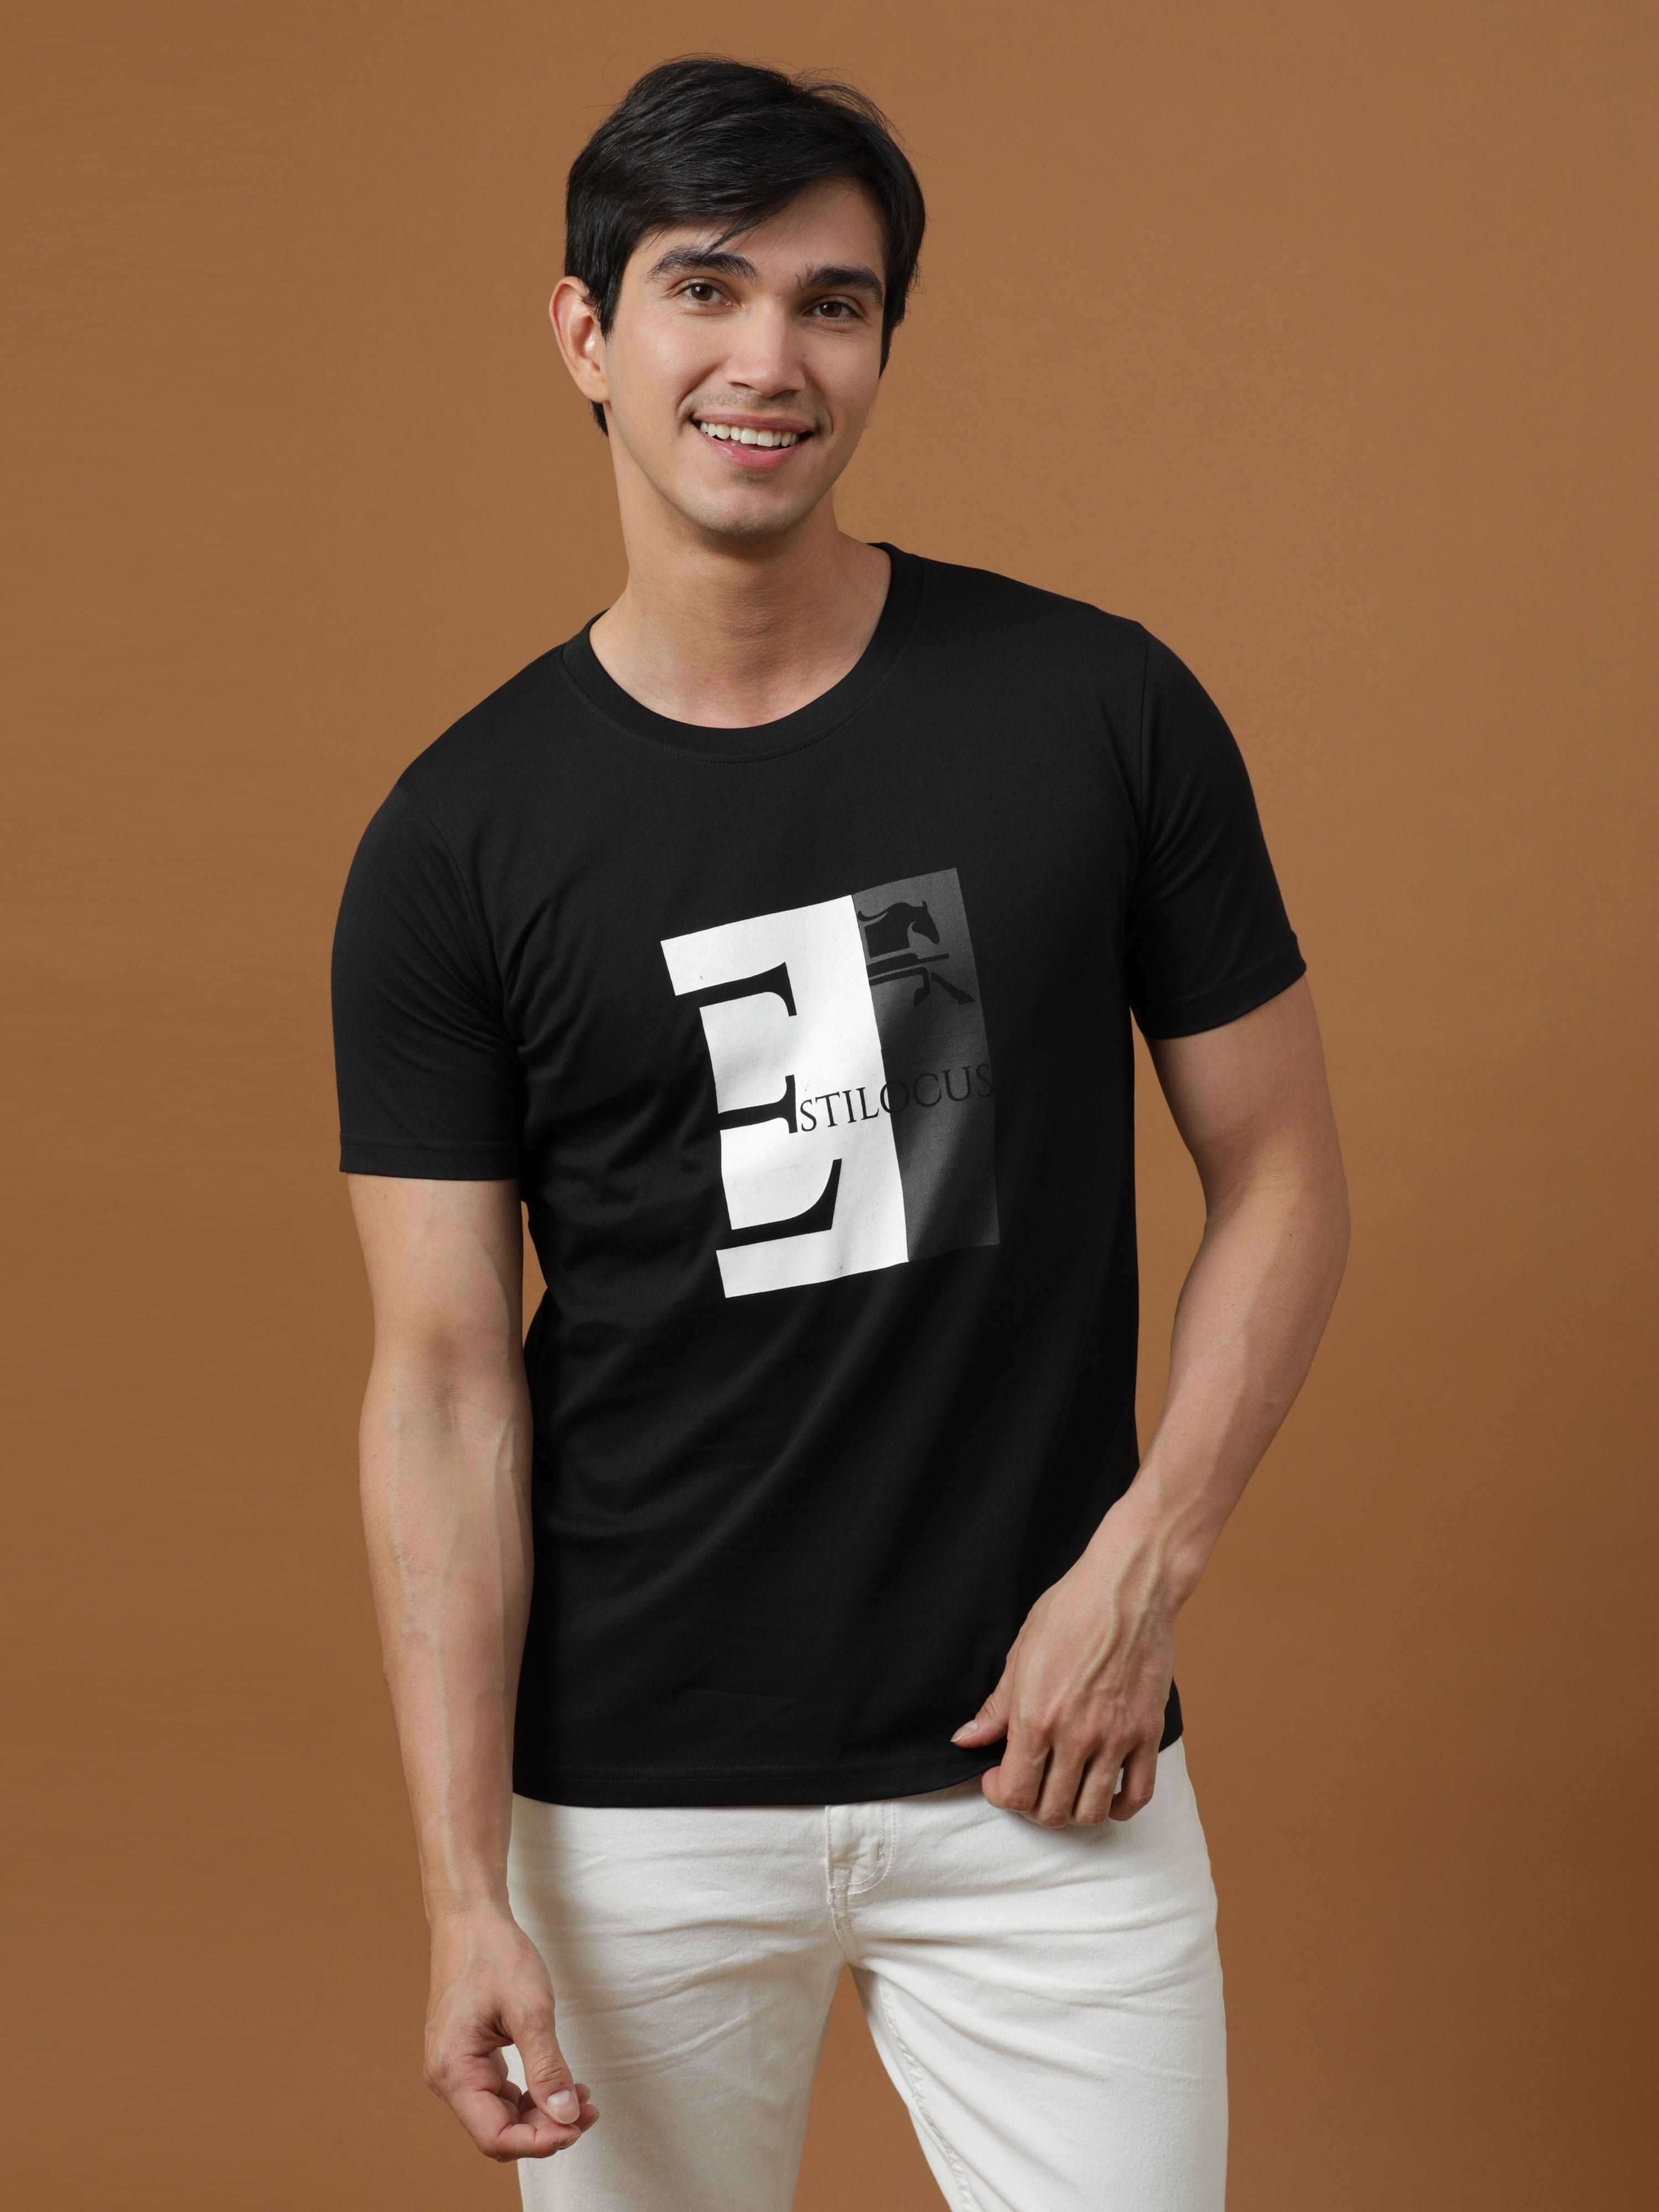 Vintage Edition Printed Black T Shirt shop online at Estilocus. 100% Cotton Designed and printed on knitted fabric. The fabric is stretchy and lightweight, with a soft skin feel and no wrinkles. Crew neck collar which is smooth on the neck and keeps you c